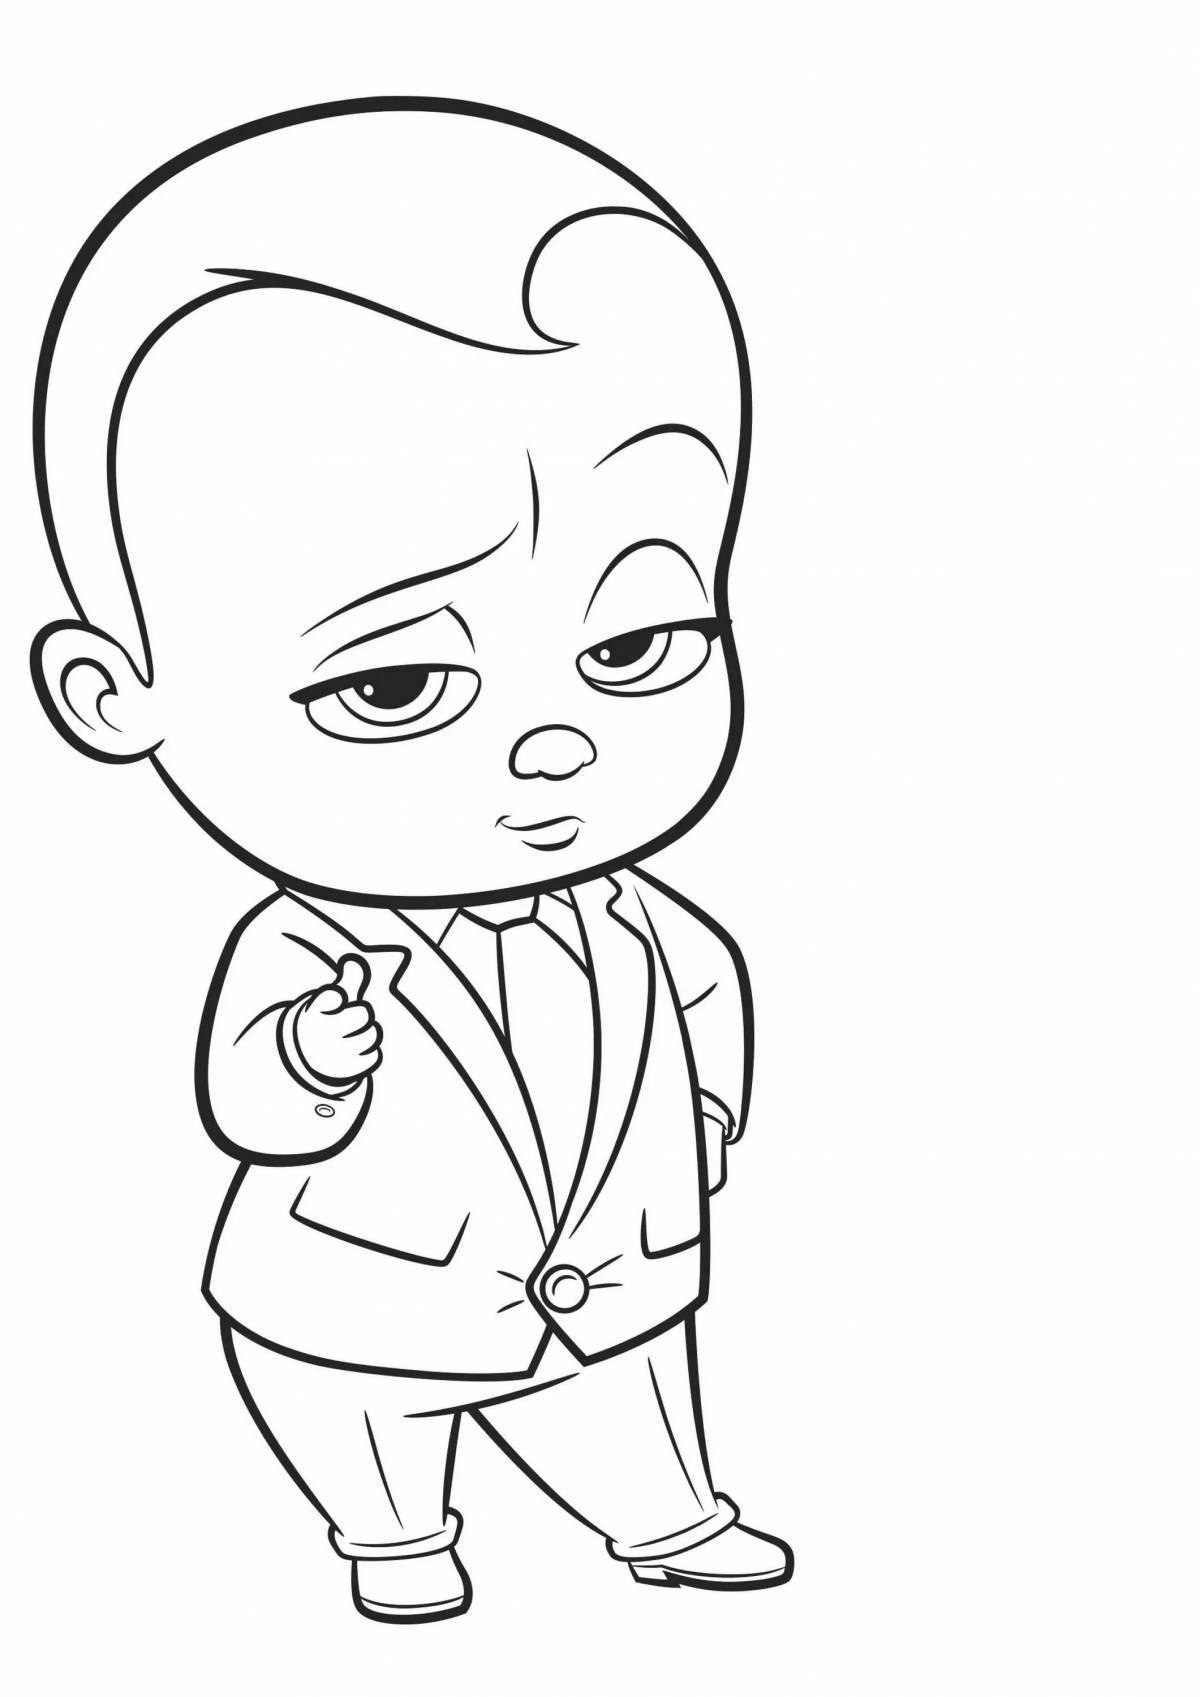 Color explosion cartoon character coloring page